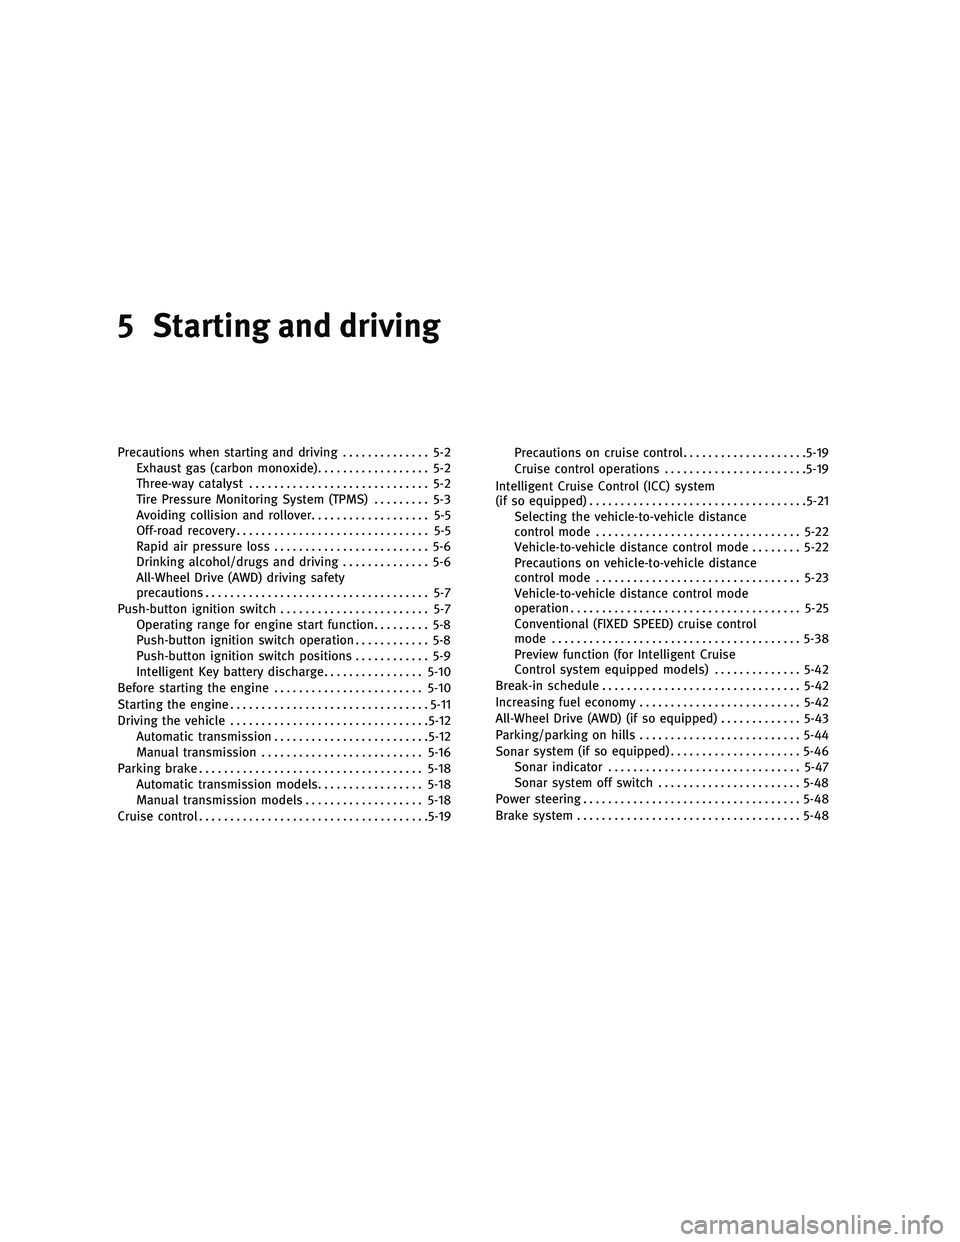 INFINITI G 2010 Service Manual 5 Starting and driving
Precautions when starting and driving.............. 5-2
Exhaust gas (carbon monoxide) .................. 5-2
Three-way catalyst ............................. 5-2
Tire Pressure M